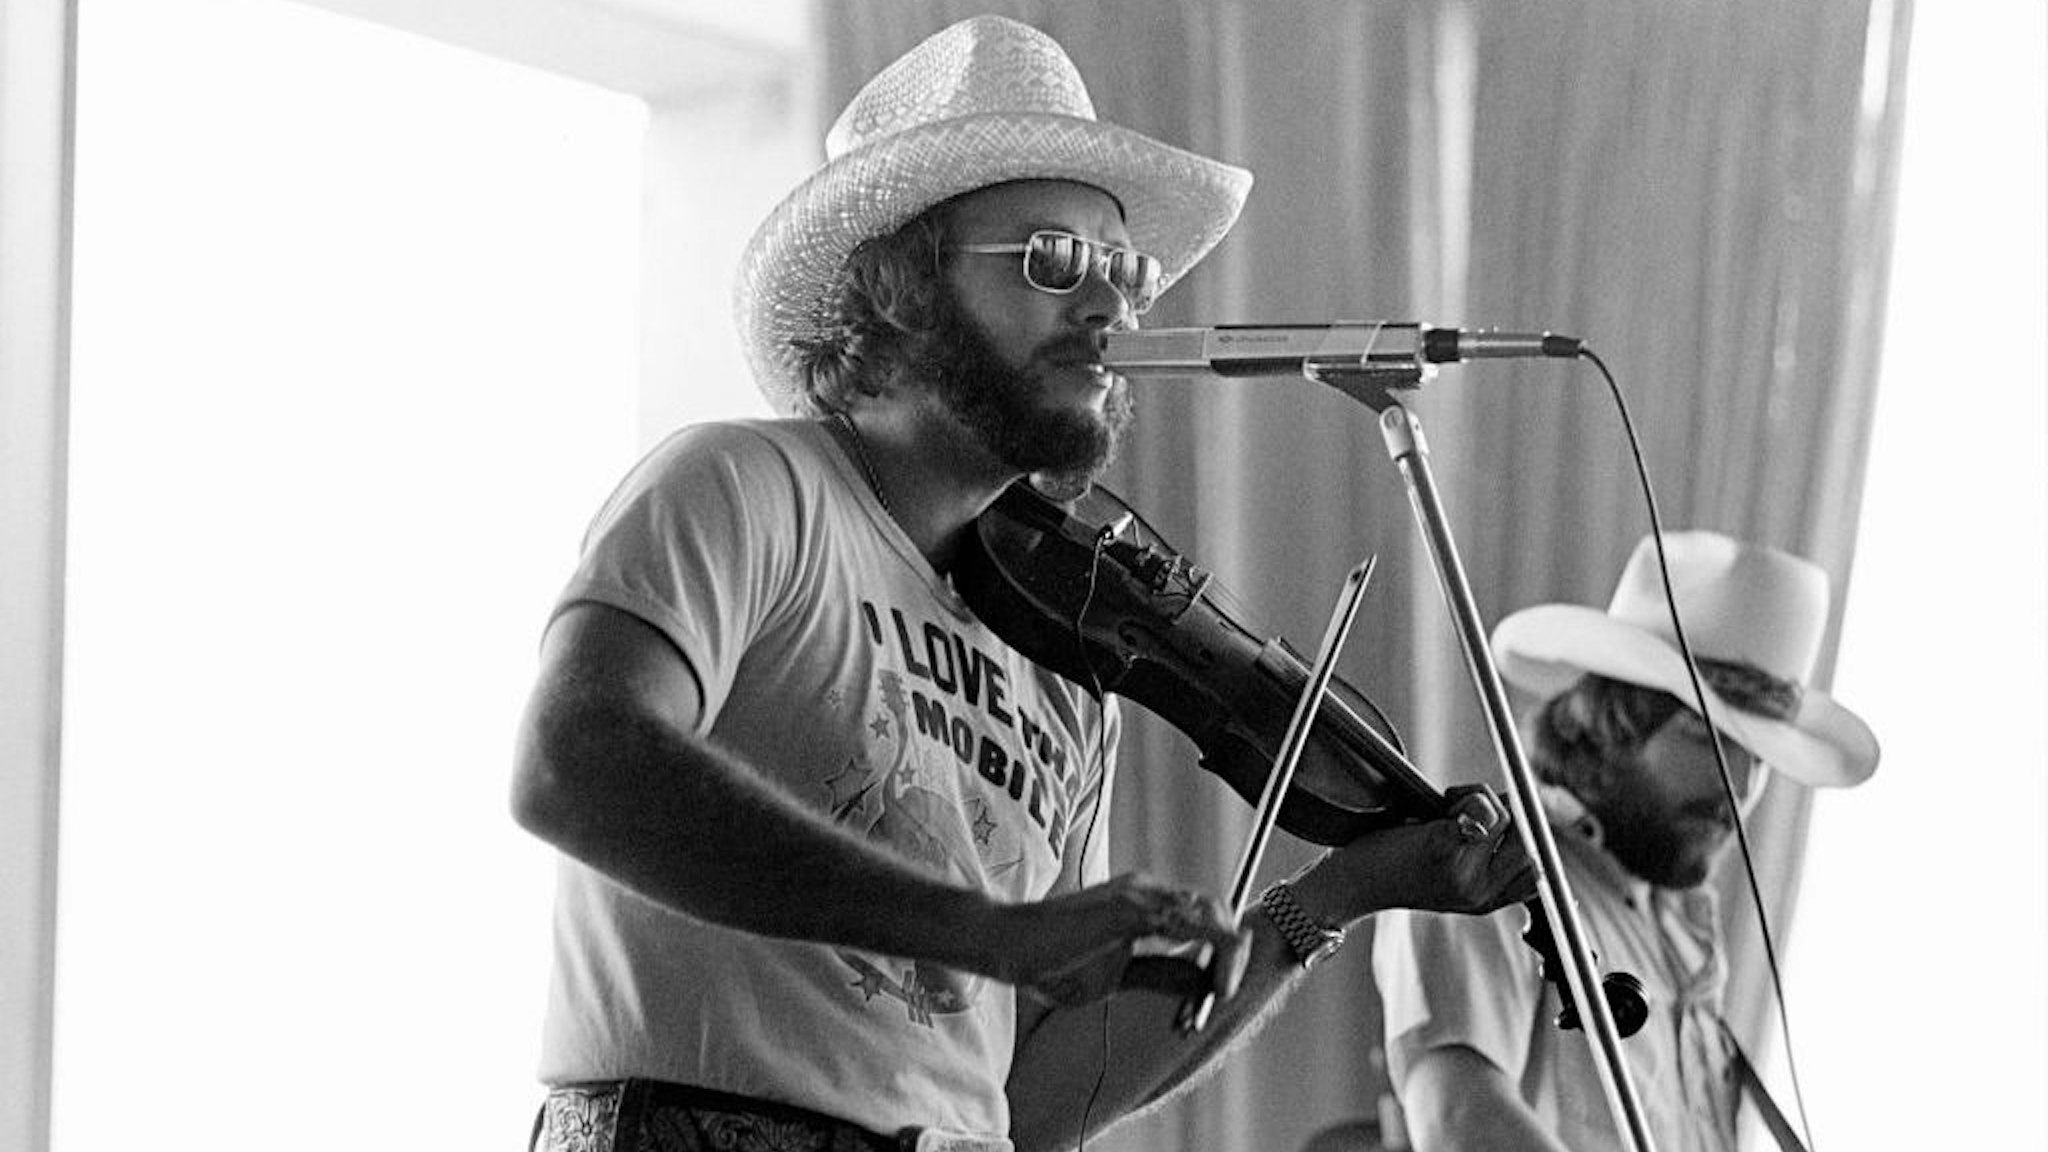 ATLANTA - MAY 26: Hank Williams Jr. performs for a record industry audience at Stouffer's Hotel on May 26, 1977 in Atlanta, Georgia. ( Photo by Tom Hill/Getty Images)